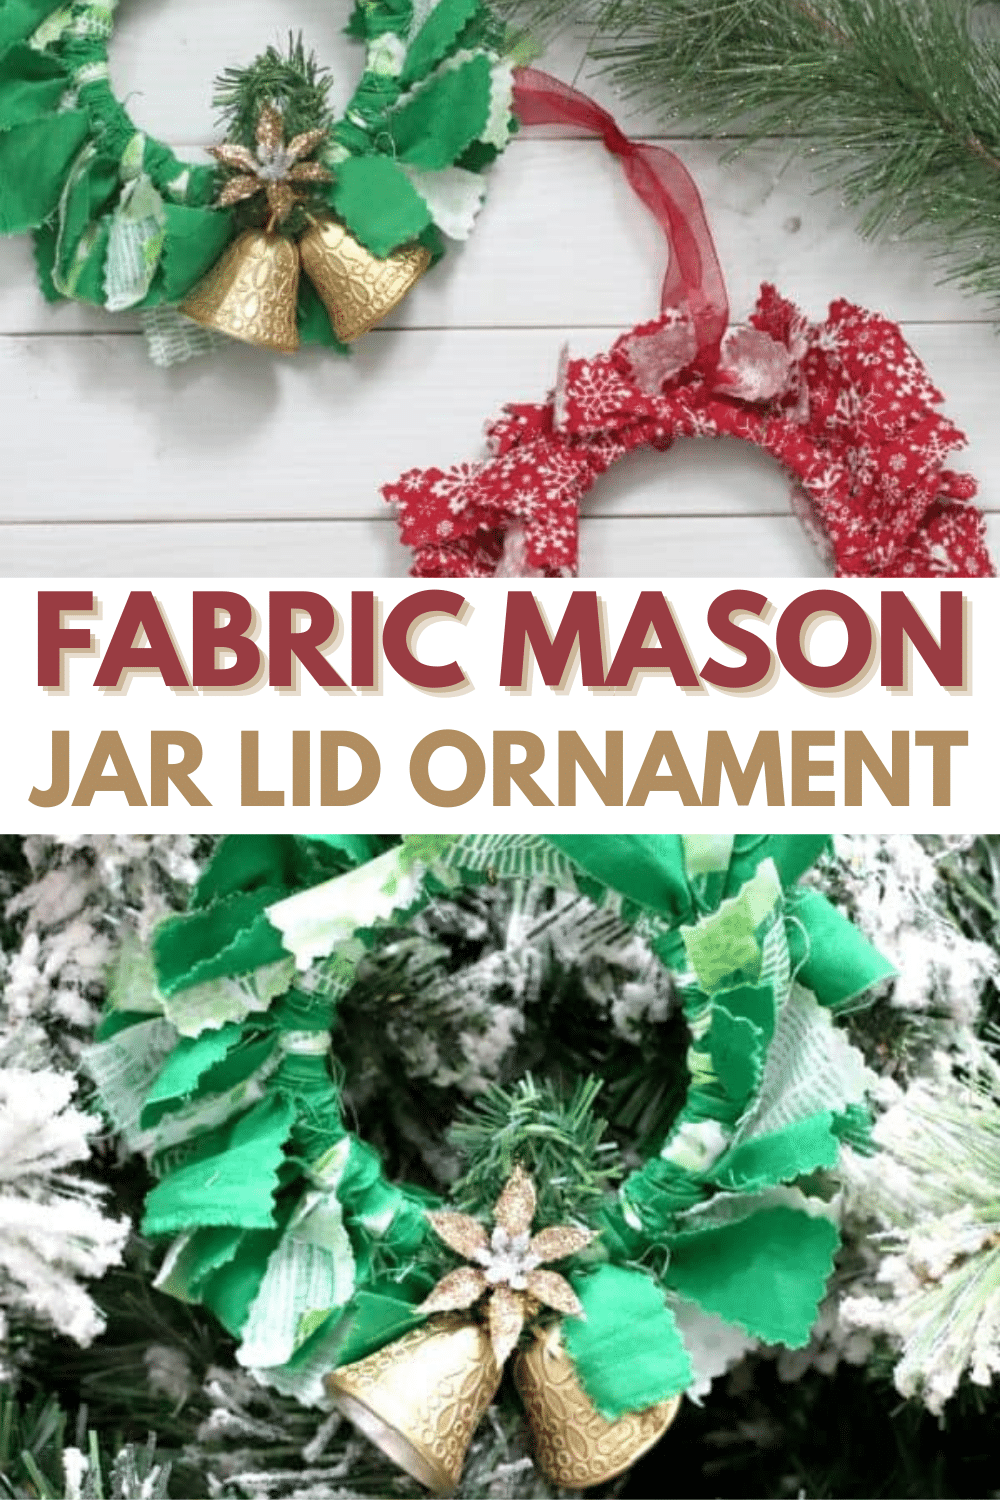 top image is DIY Fabric Mason Jar Lid Ornaments on a wood background, bottom image is a DIY Fabric Mason Jar Lid Ornament on a tree